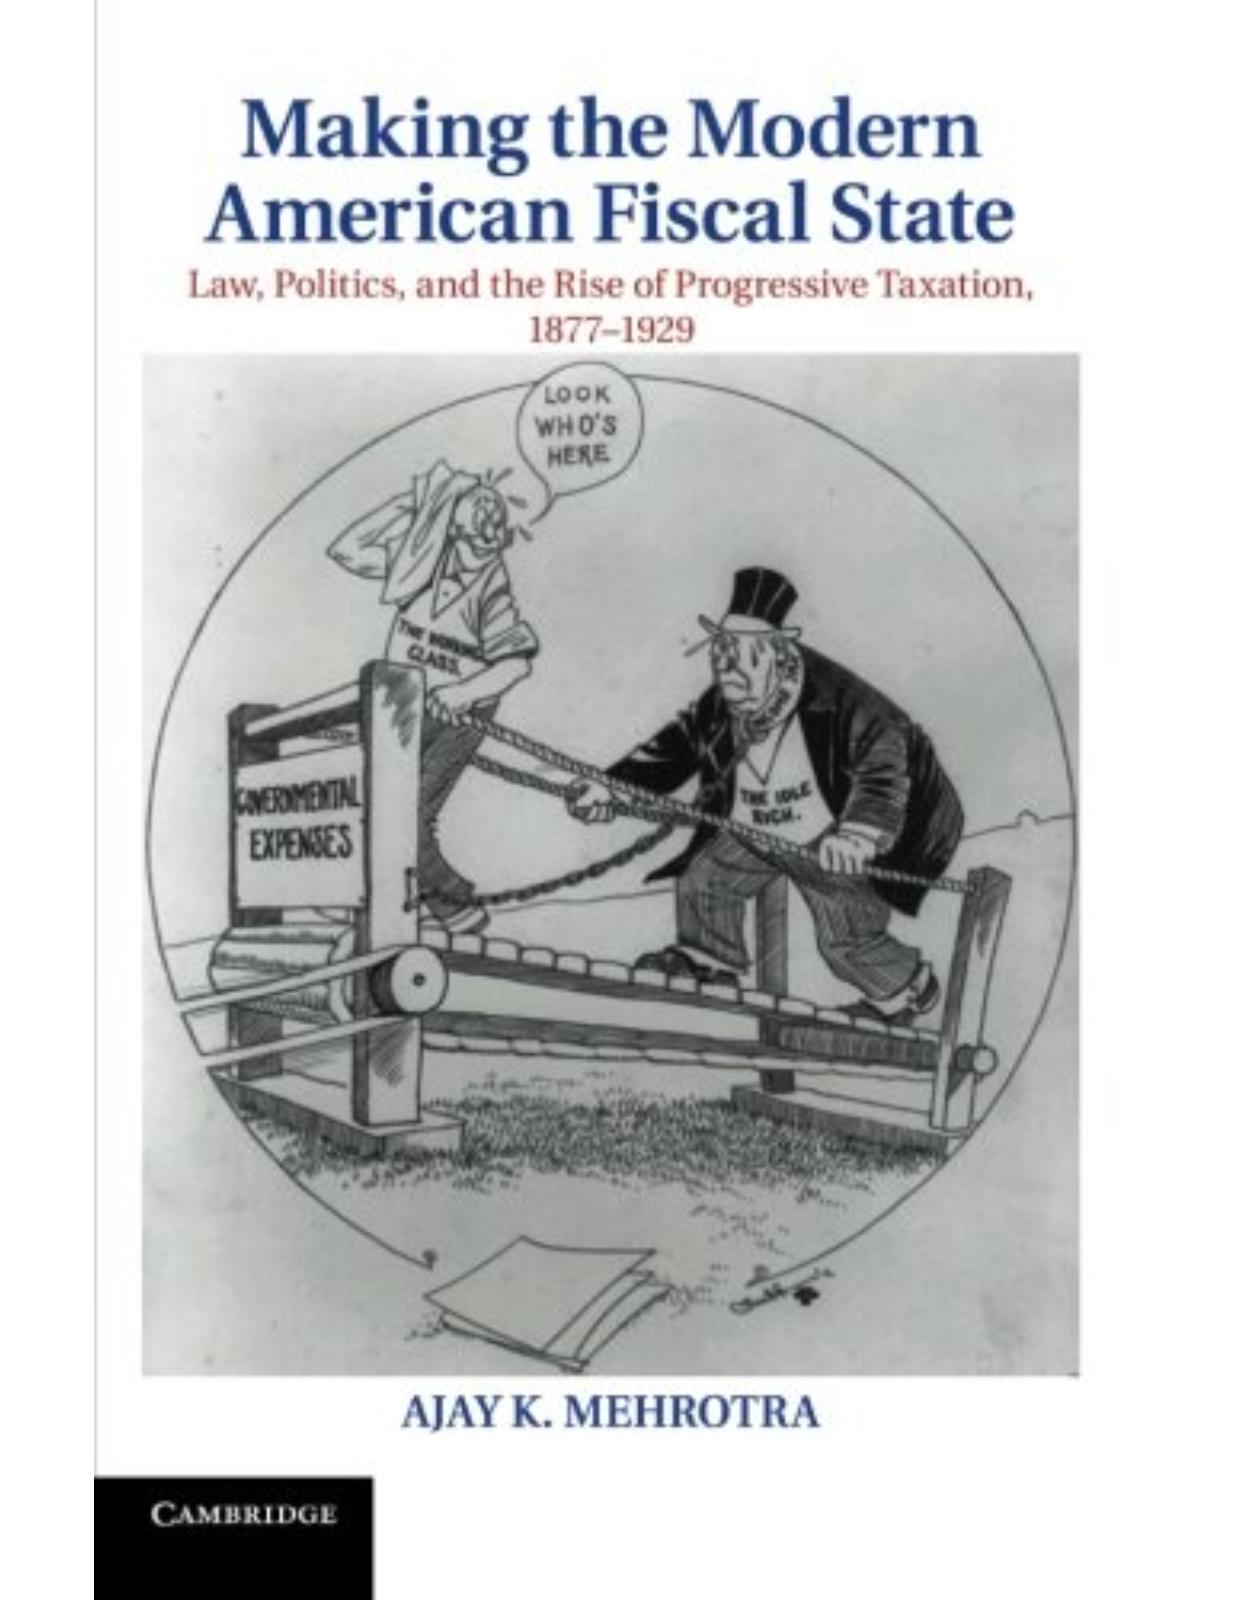 Making the Modern American Fiscal State: Law, Politics, and the Rise of Progressive Taxation, 1877-1929 (Cambridge Historical Studies in American Law and Society)